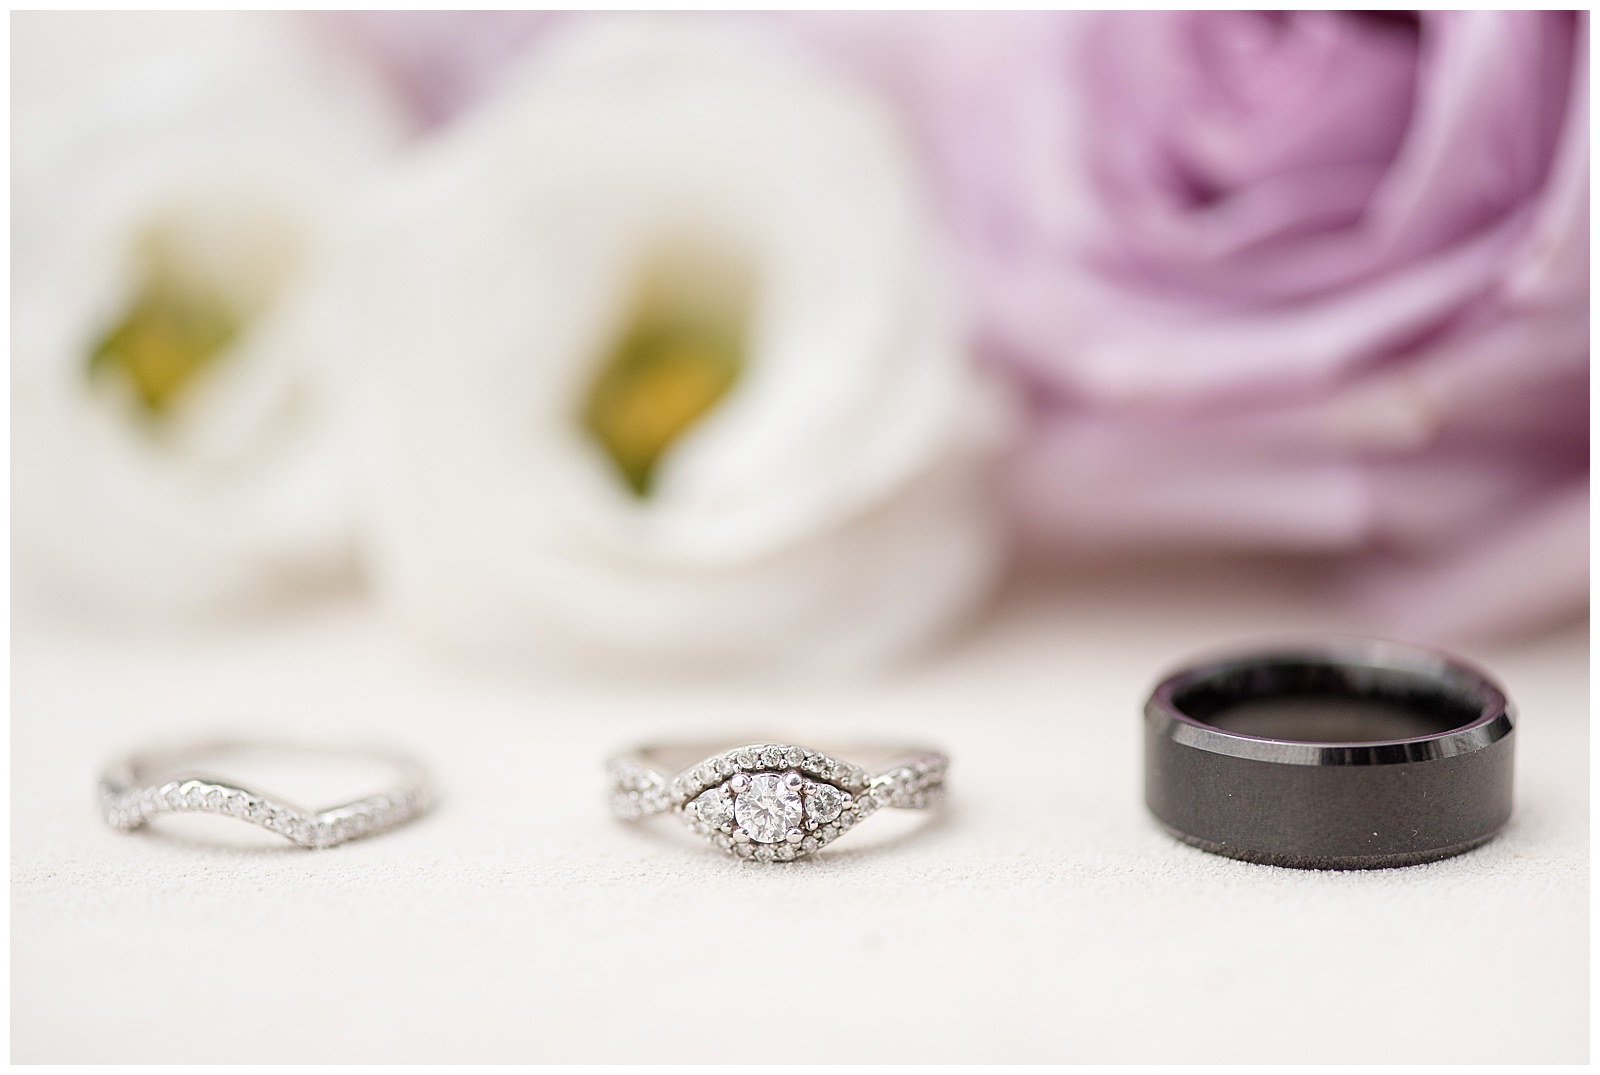 diamond engagement ring in the center with diamond wedding ring to the left and groom's black wedding band to the right with white and purple flowers in background